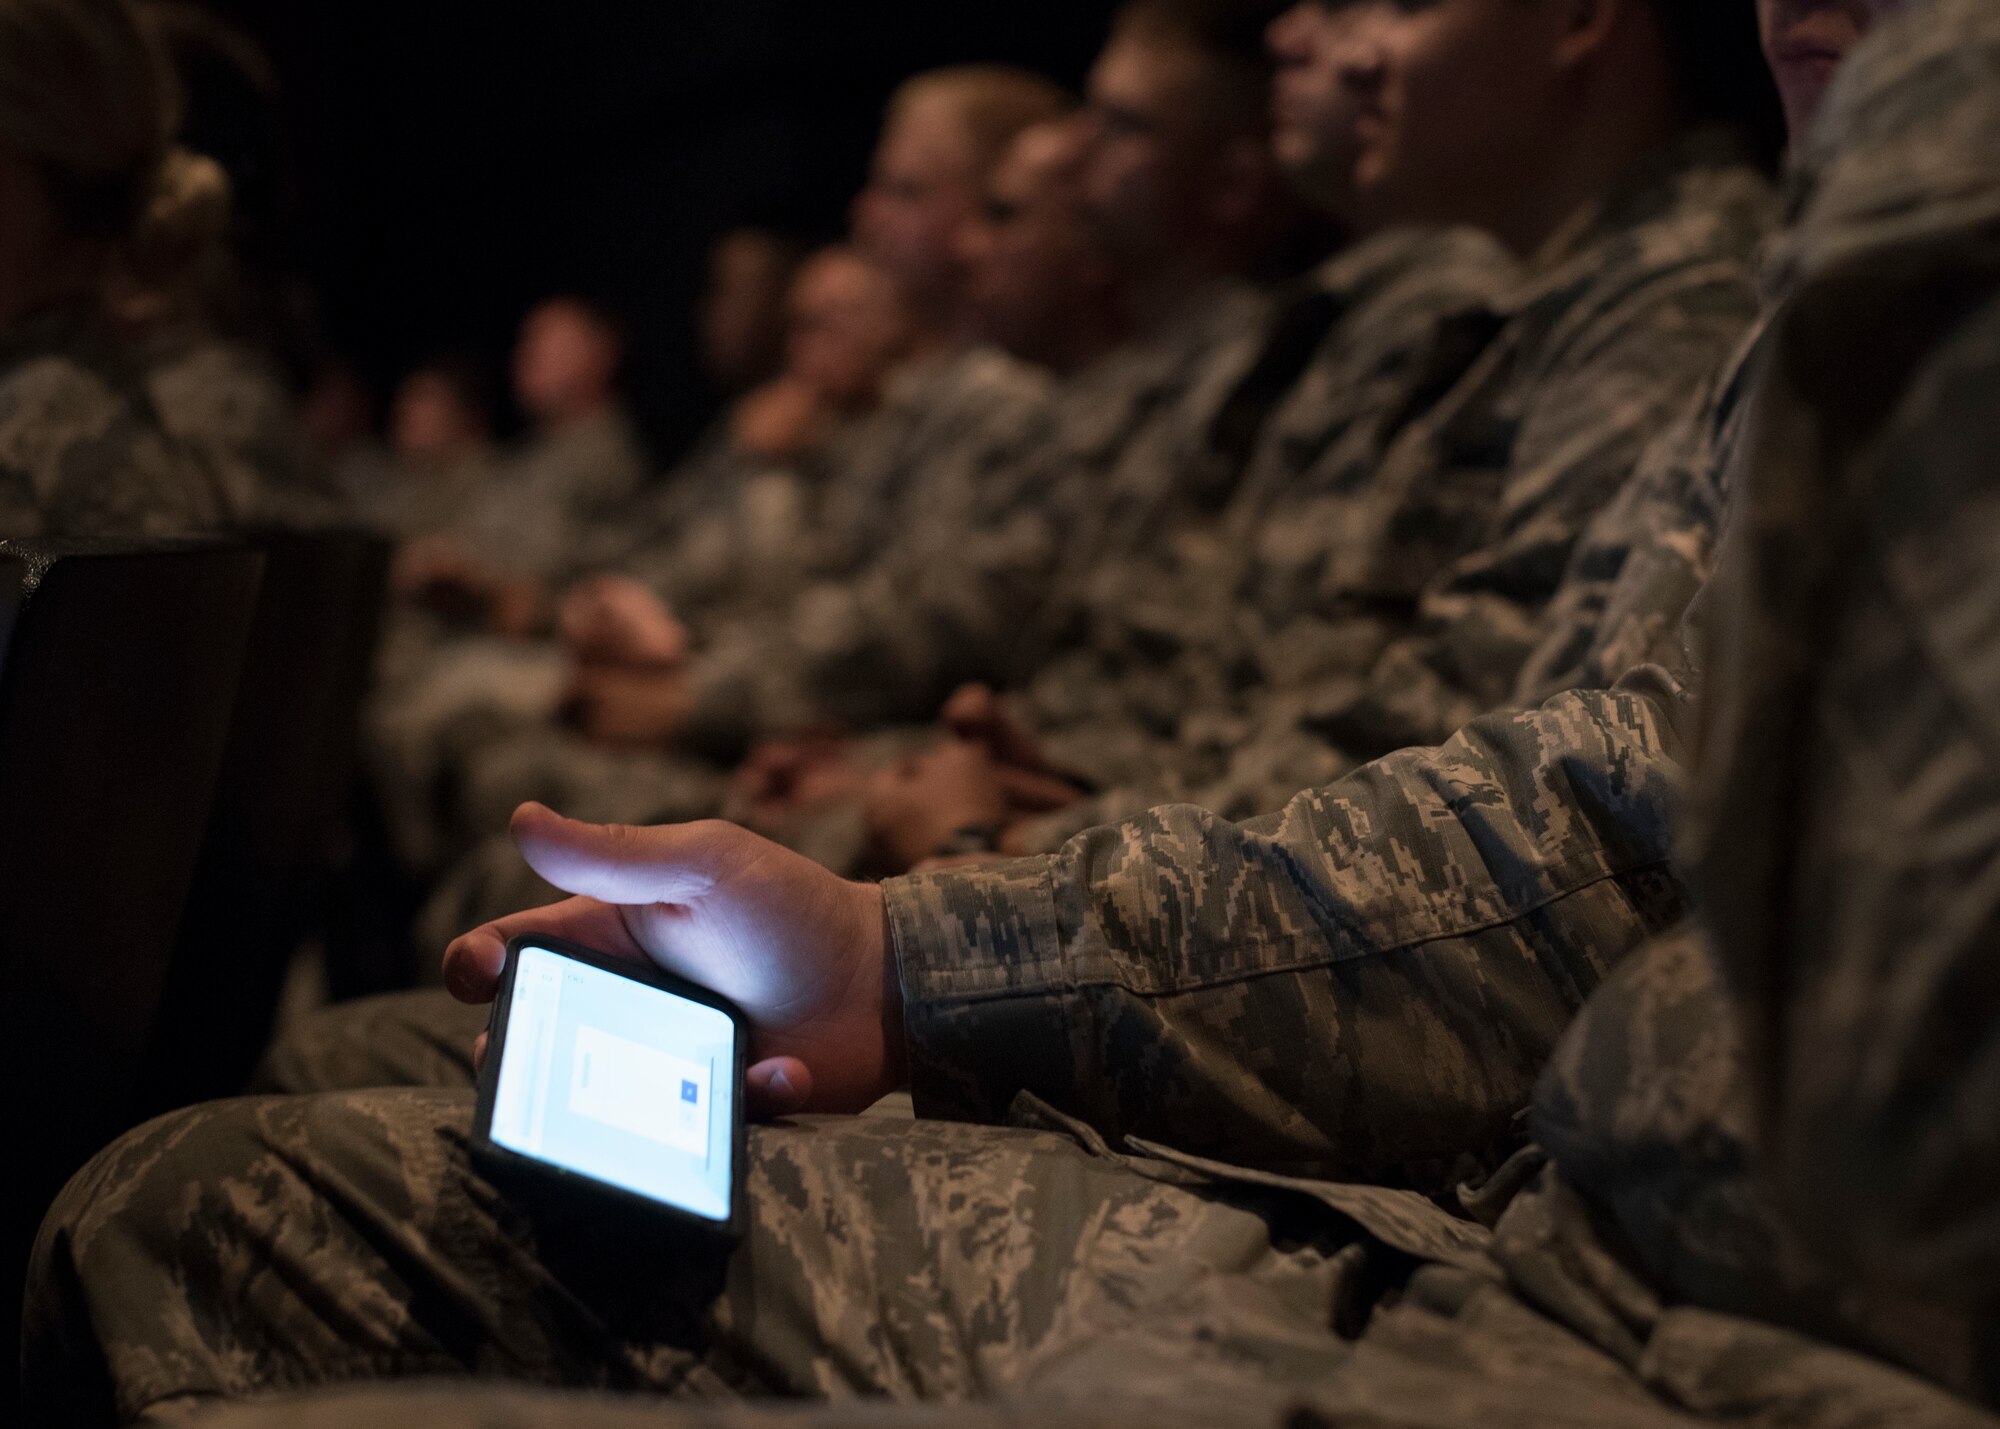 Airmen attending a base all-call use their smart phones to follow along and interact during the presentation at Fairchild Air Force Base, Washington, Sept. 26, 2018. Fairchild leadership supporting Airmen is a high priority, and were testing out the interactive format as a means to better connect with Airmen. (U.S. Air Force photo/Senior Airman Ryan Lackey)